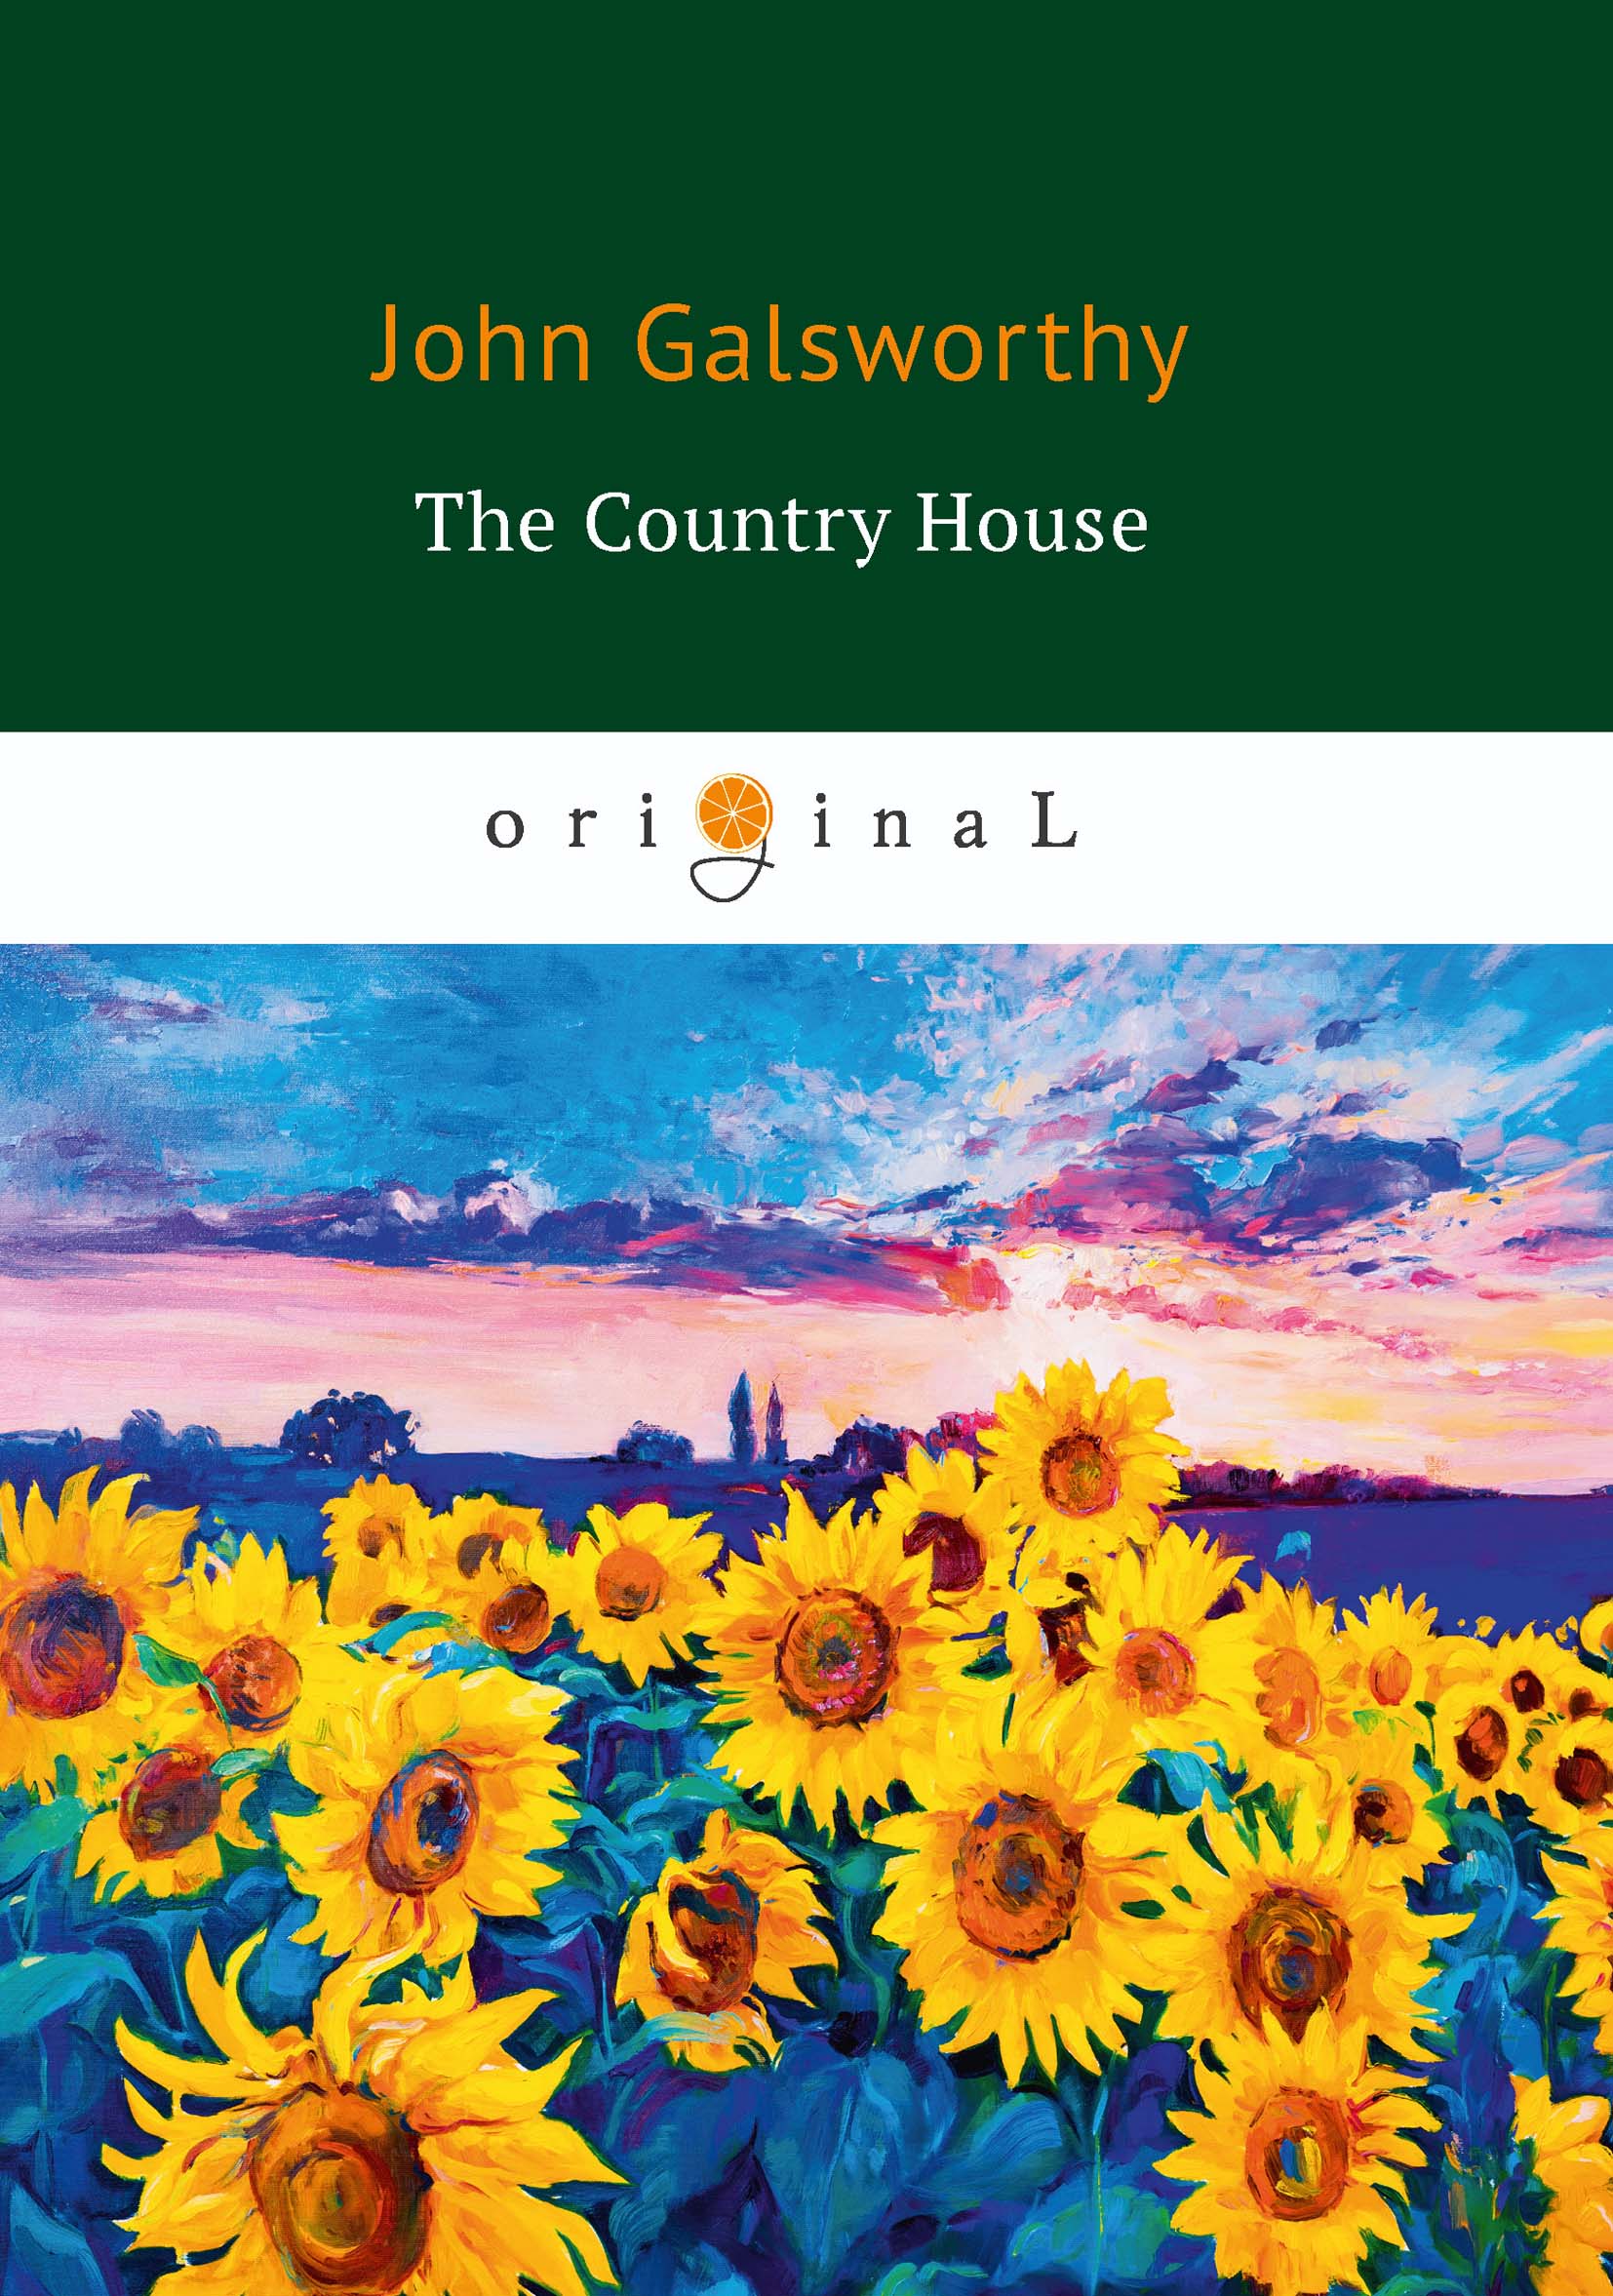 The Country House. John Galsworthy